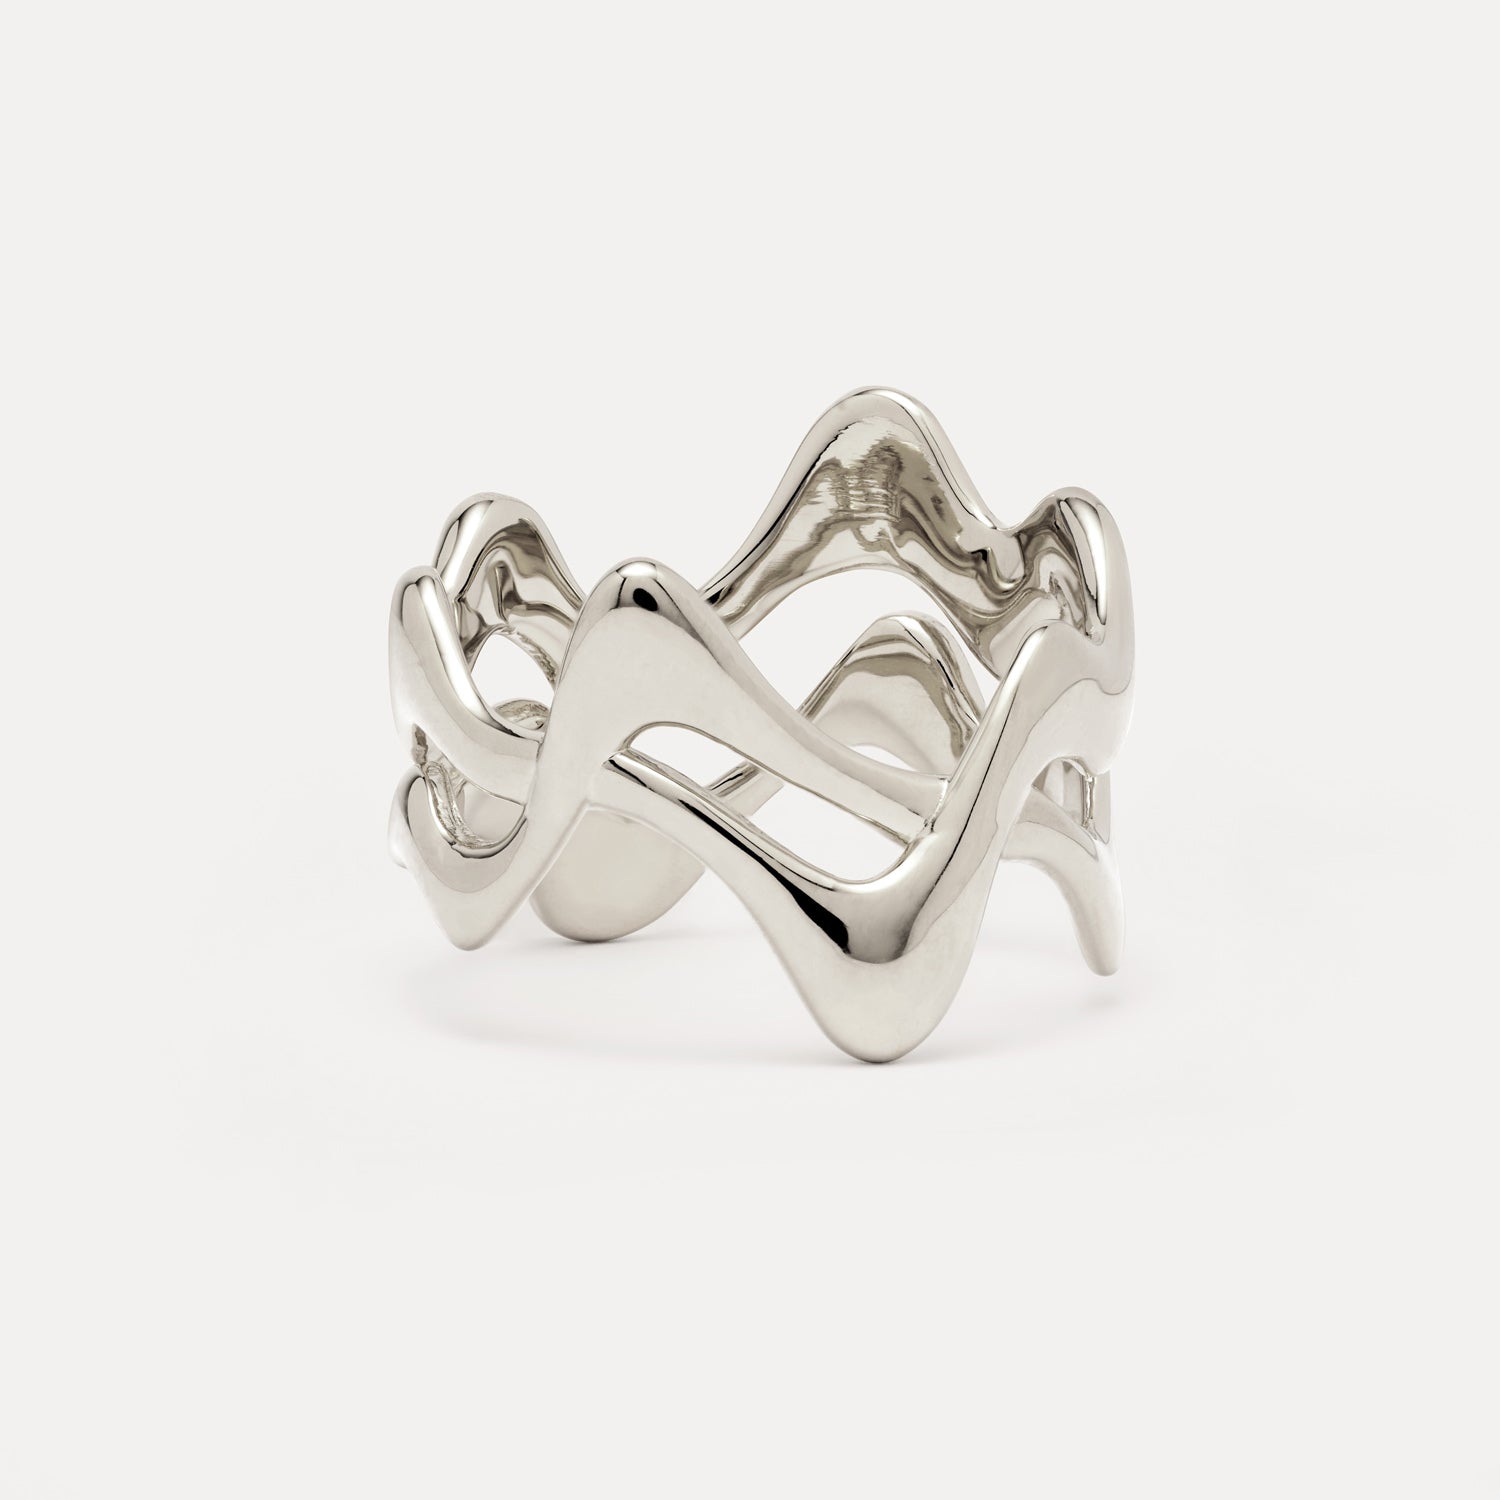 Poise Double Pre-Stacked Ring, recycled Sterling Silver - VEYIA Berlin